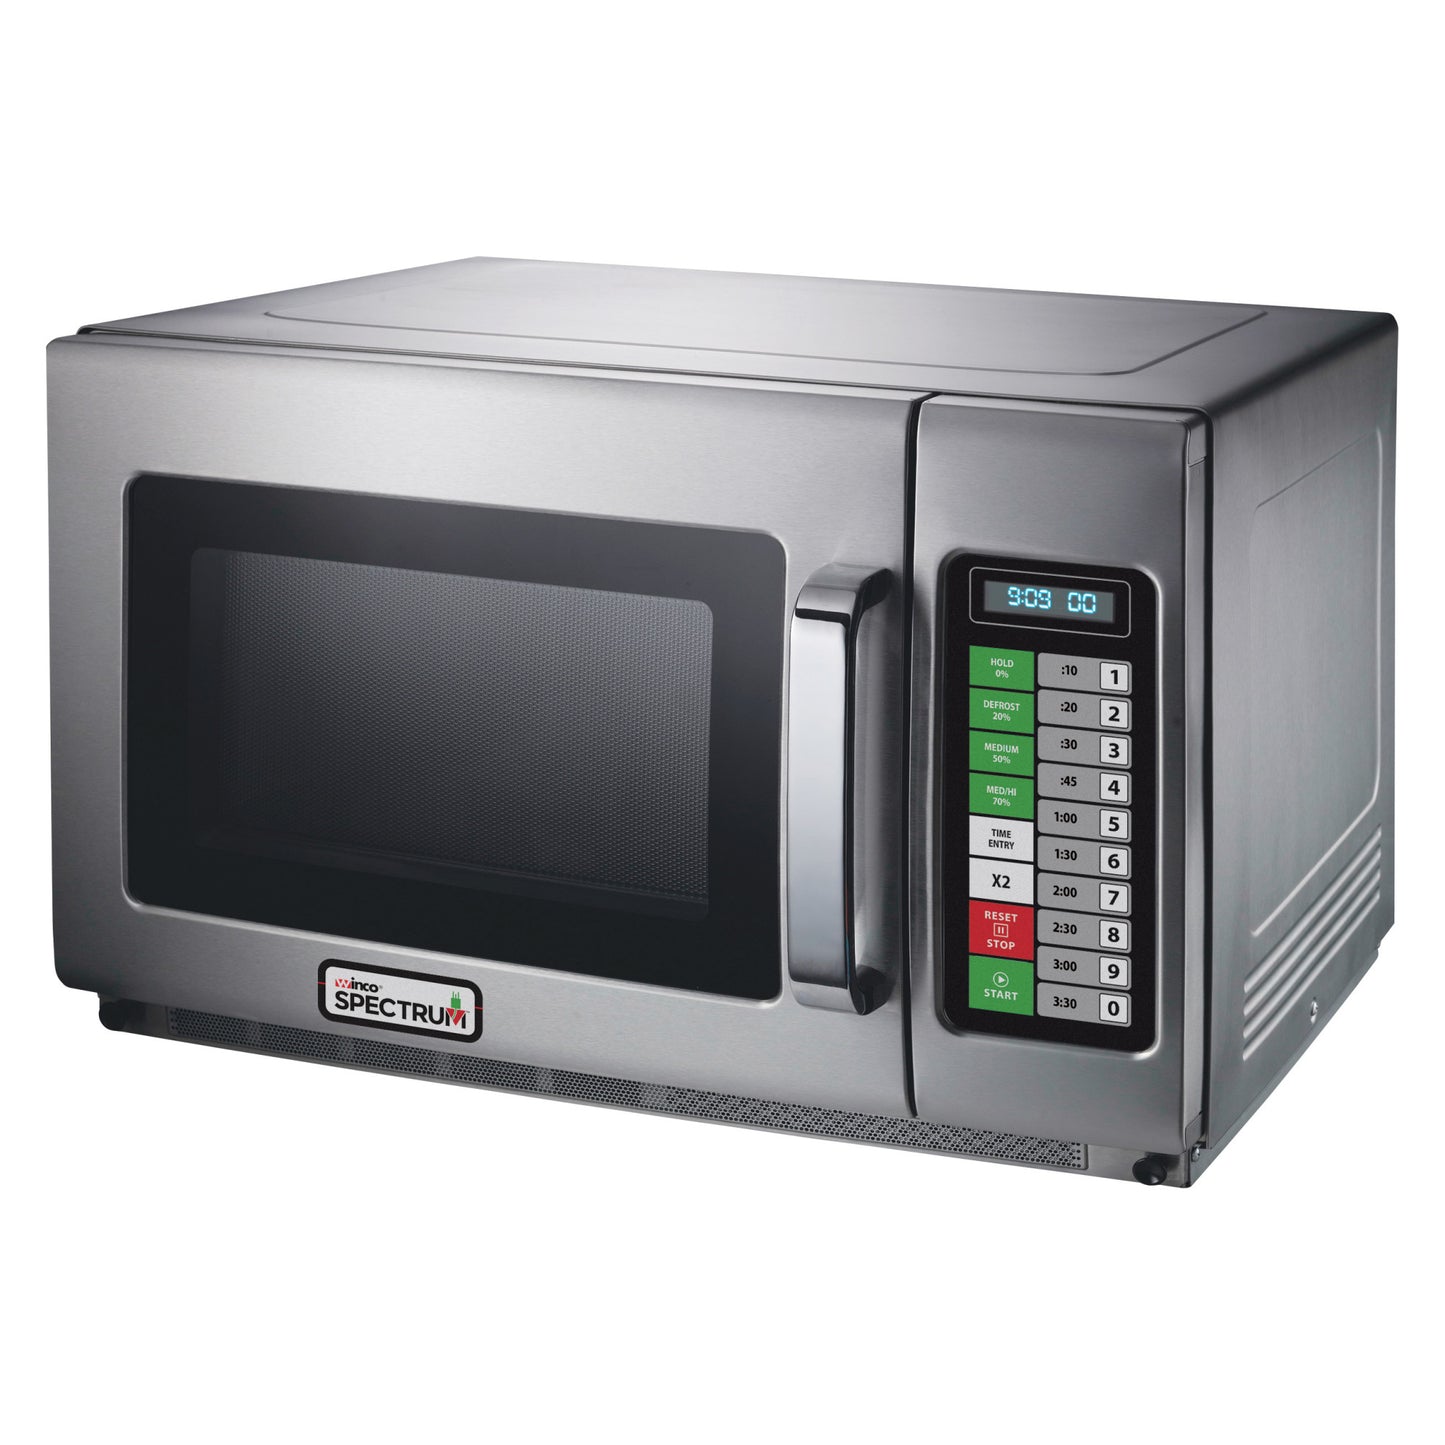 EMW-1800AT - Spectrum Touch Control Microwave - 1800 Watts